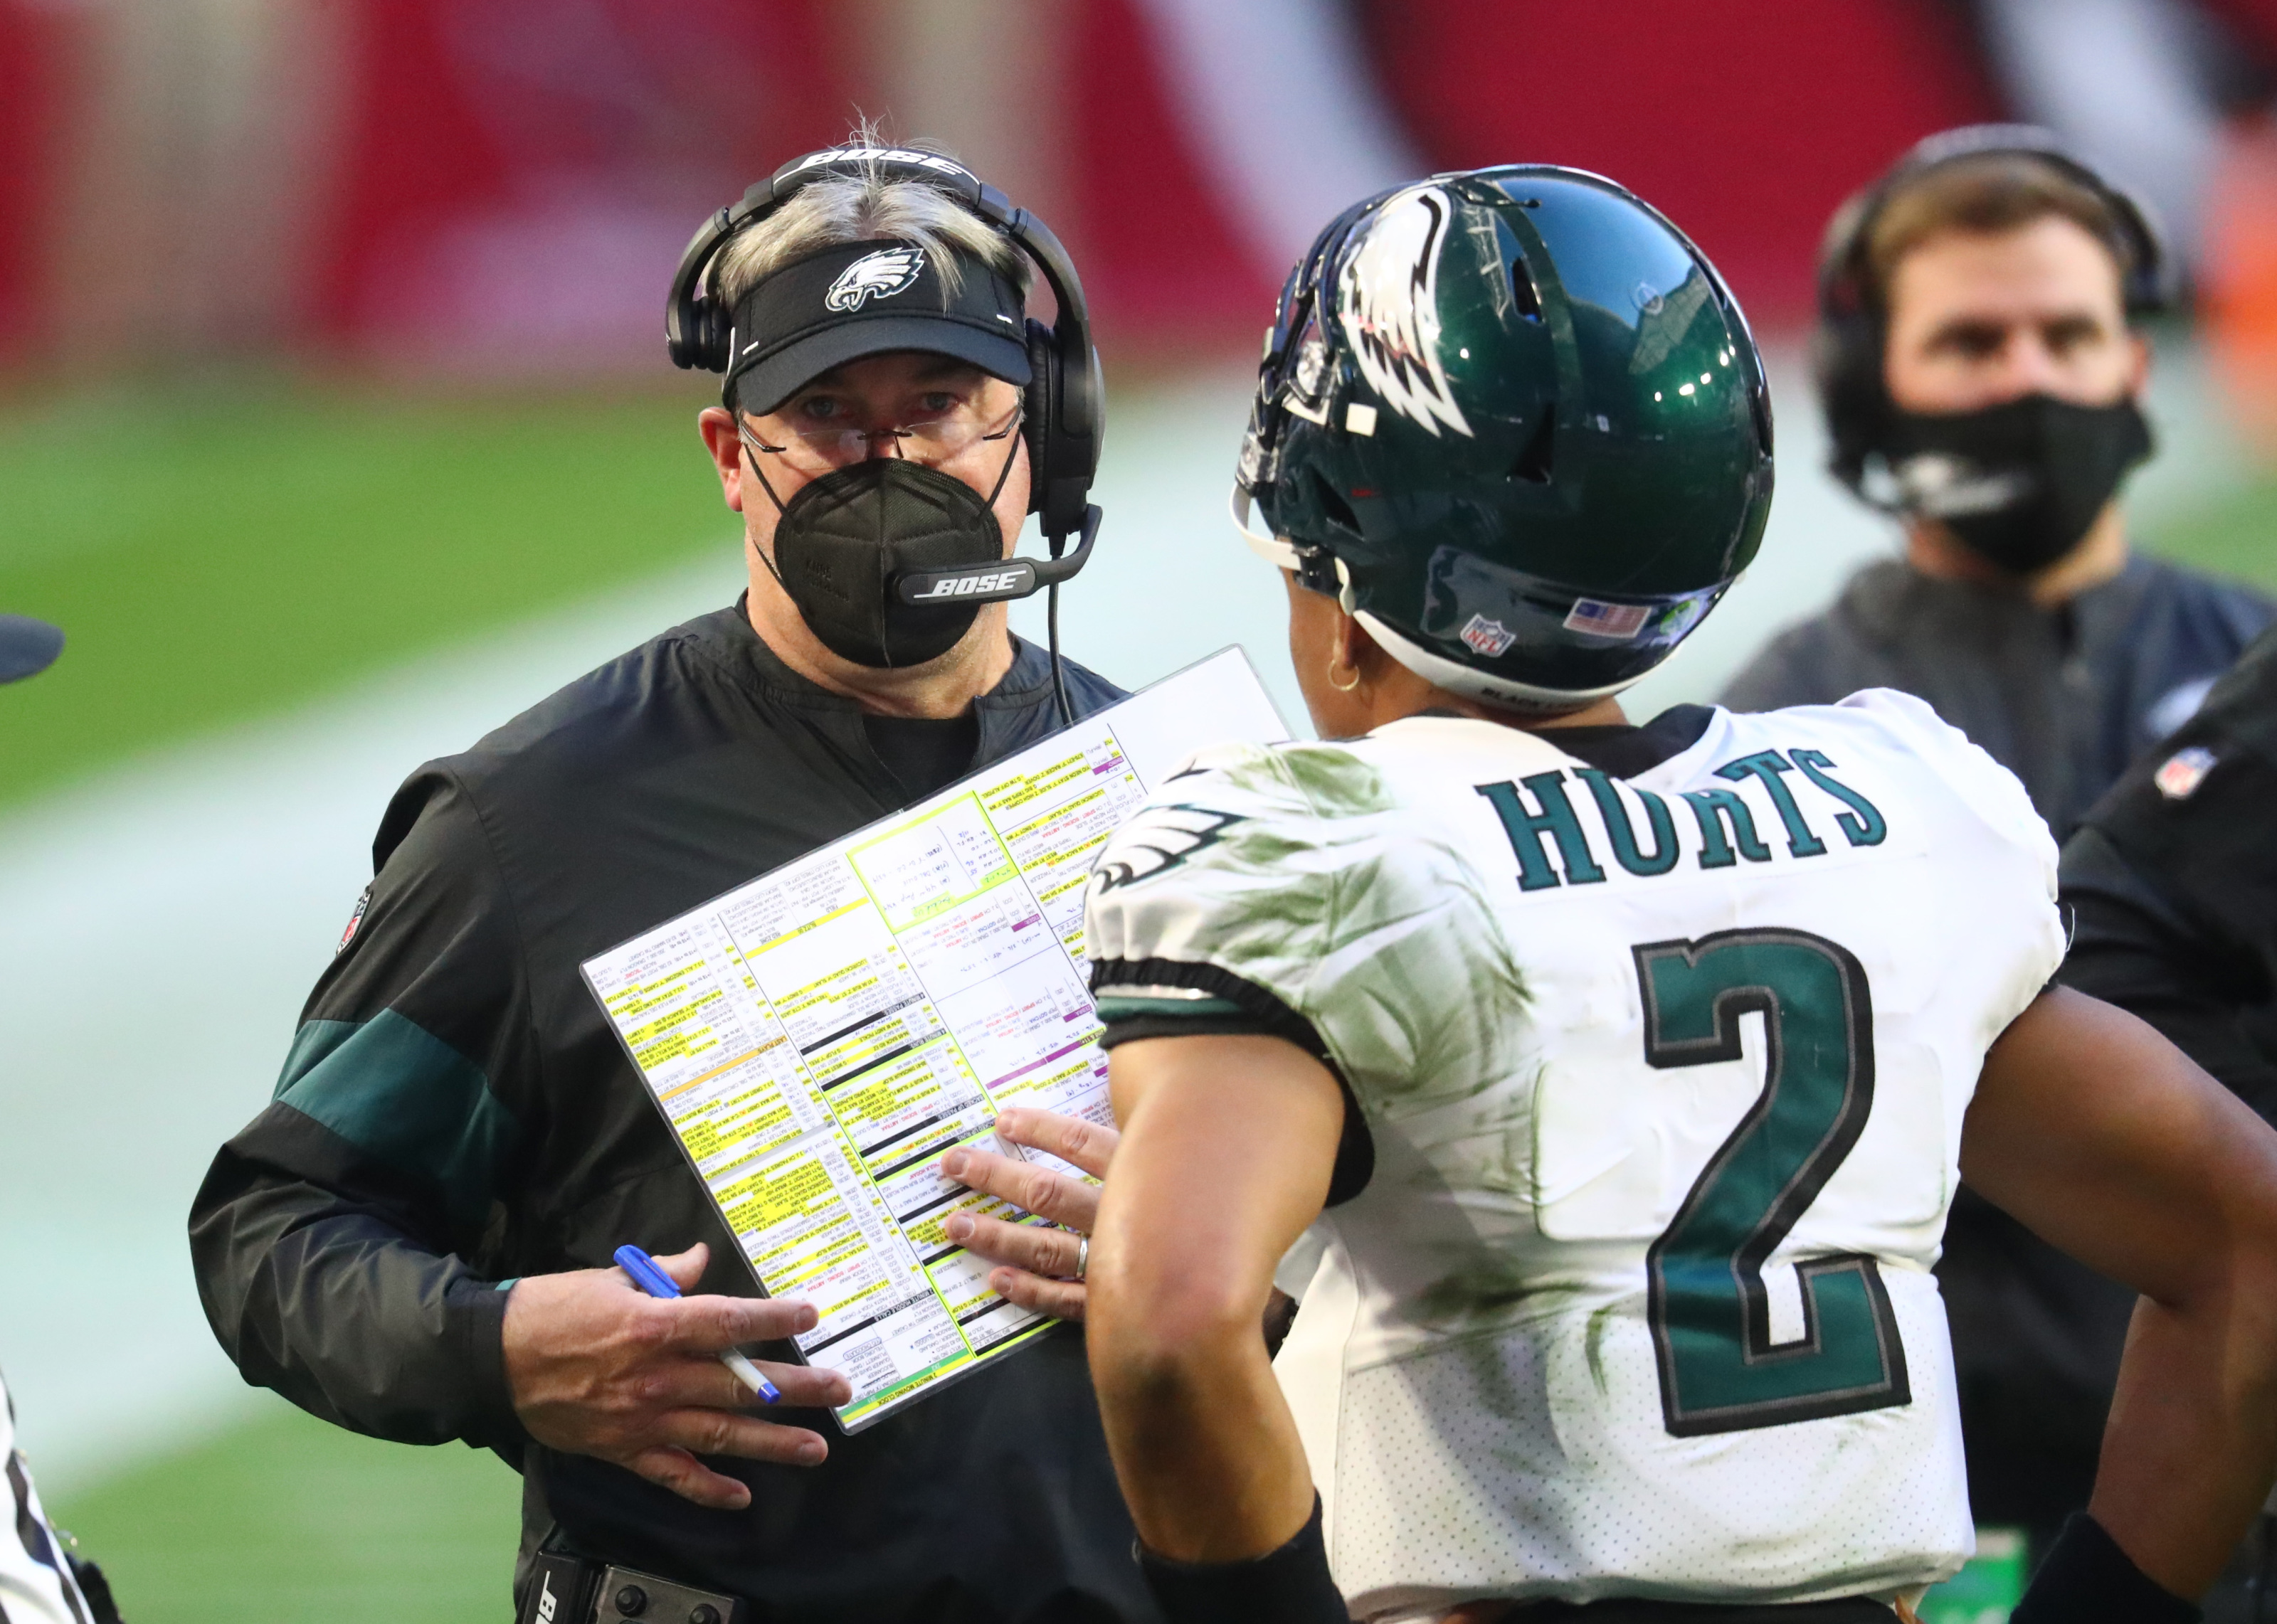 Eagles playoff scenarios: Will the Giants play spoiler after